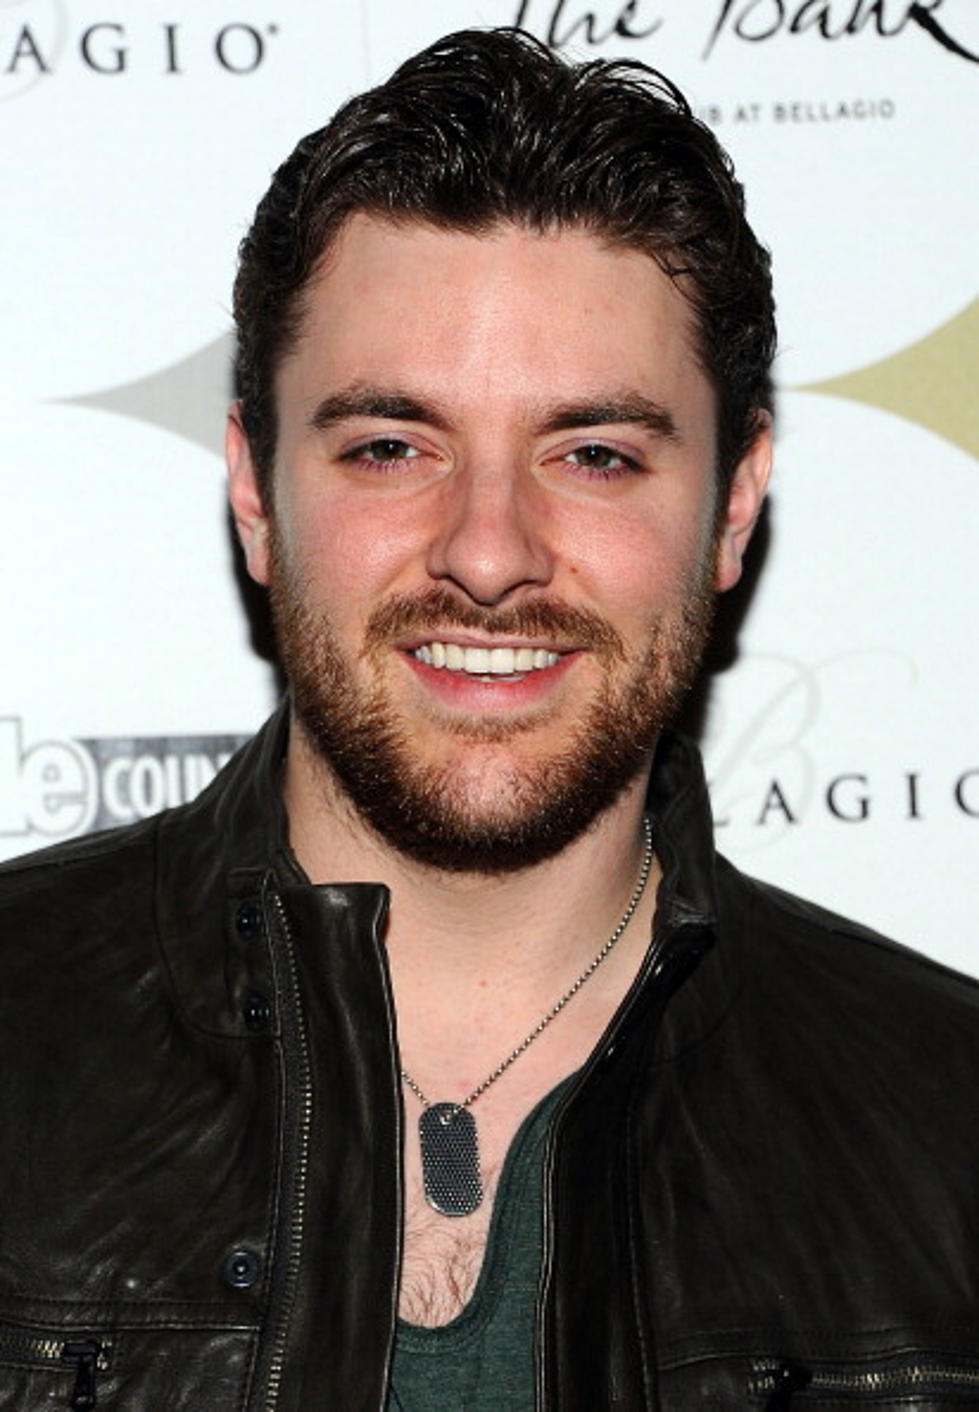 Chris Young “Tomorrow” New Music Video